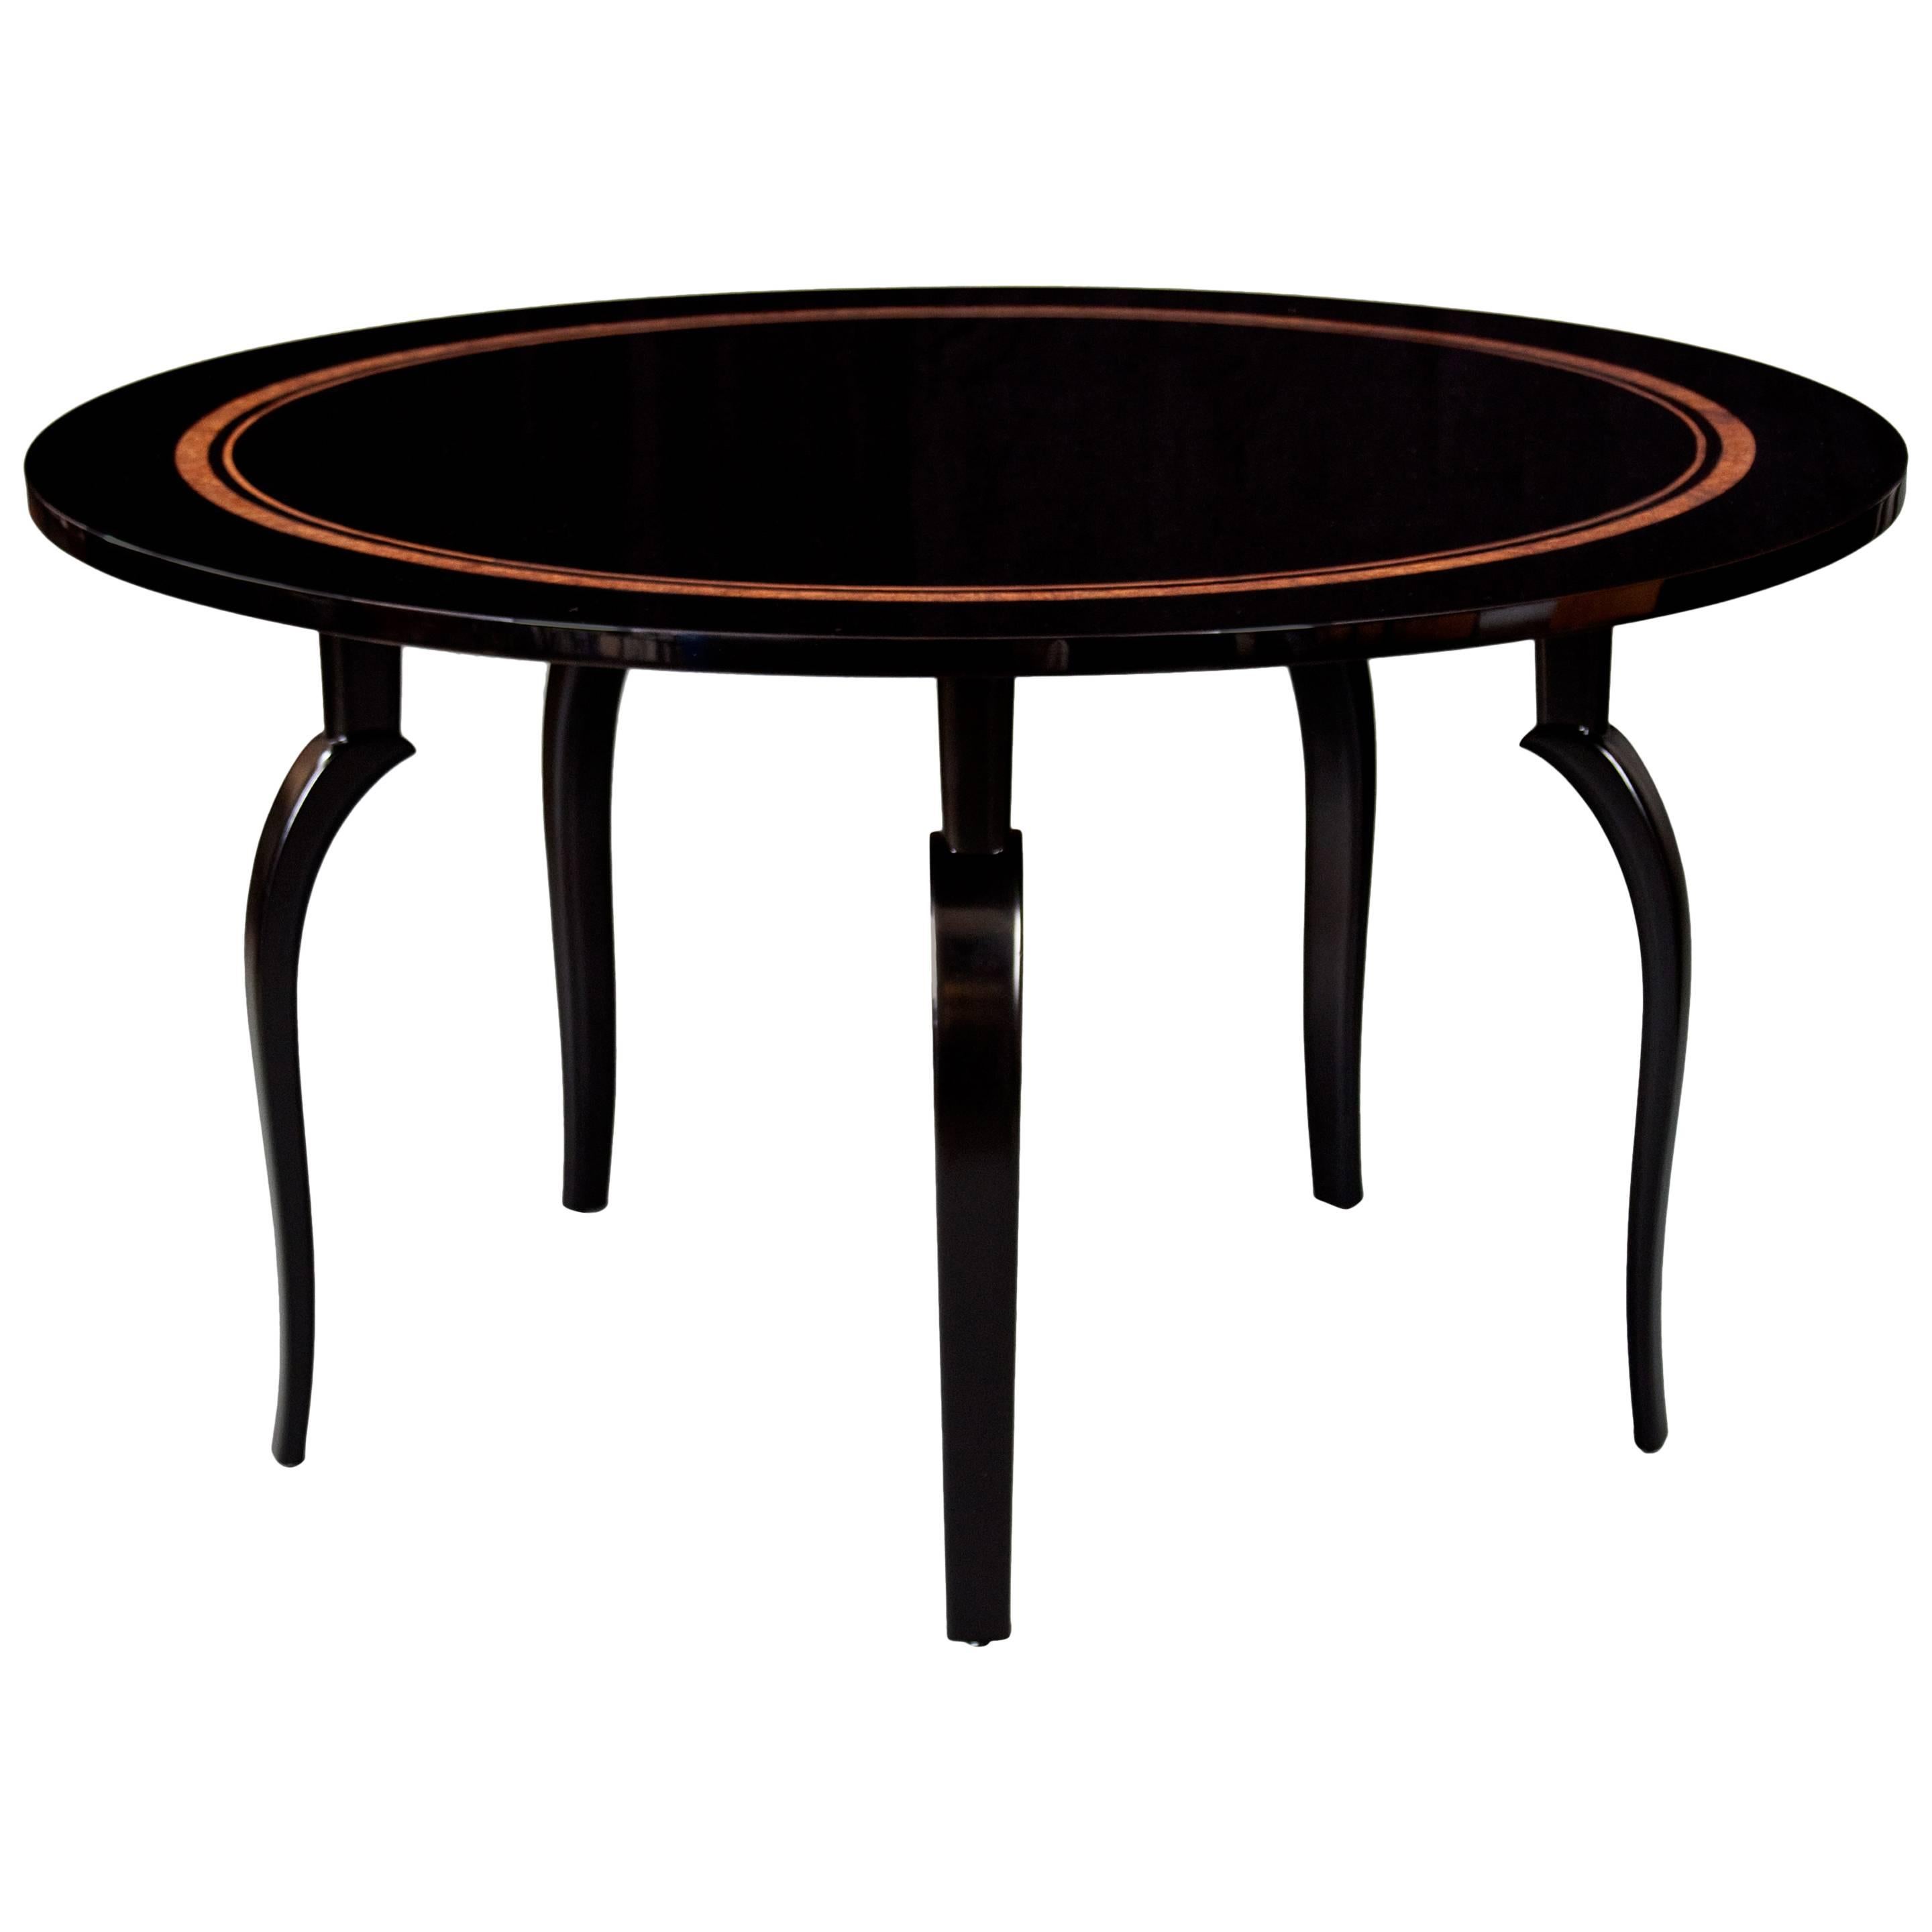 Carl Hörvik for NK, Unique Swedish Black Lacquer and Burlwood Circular Table